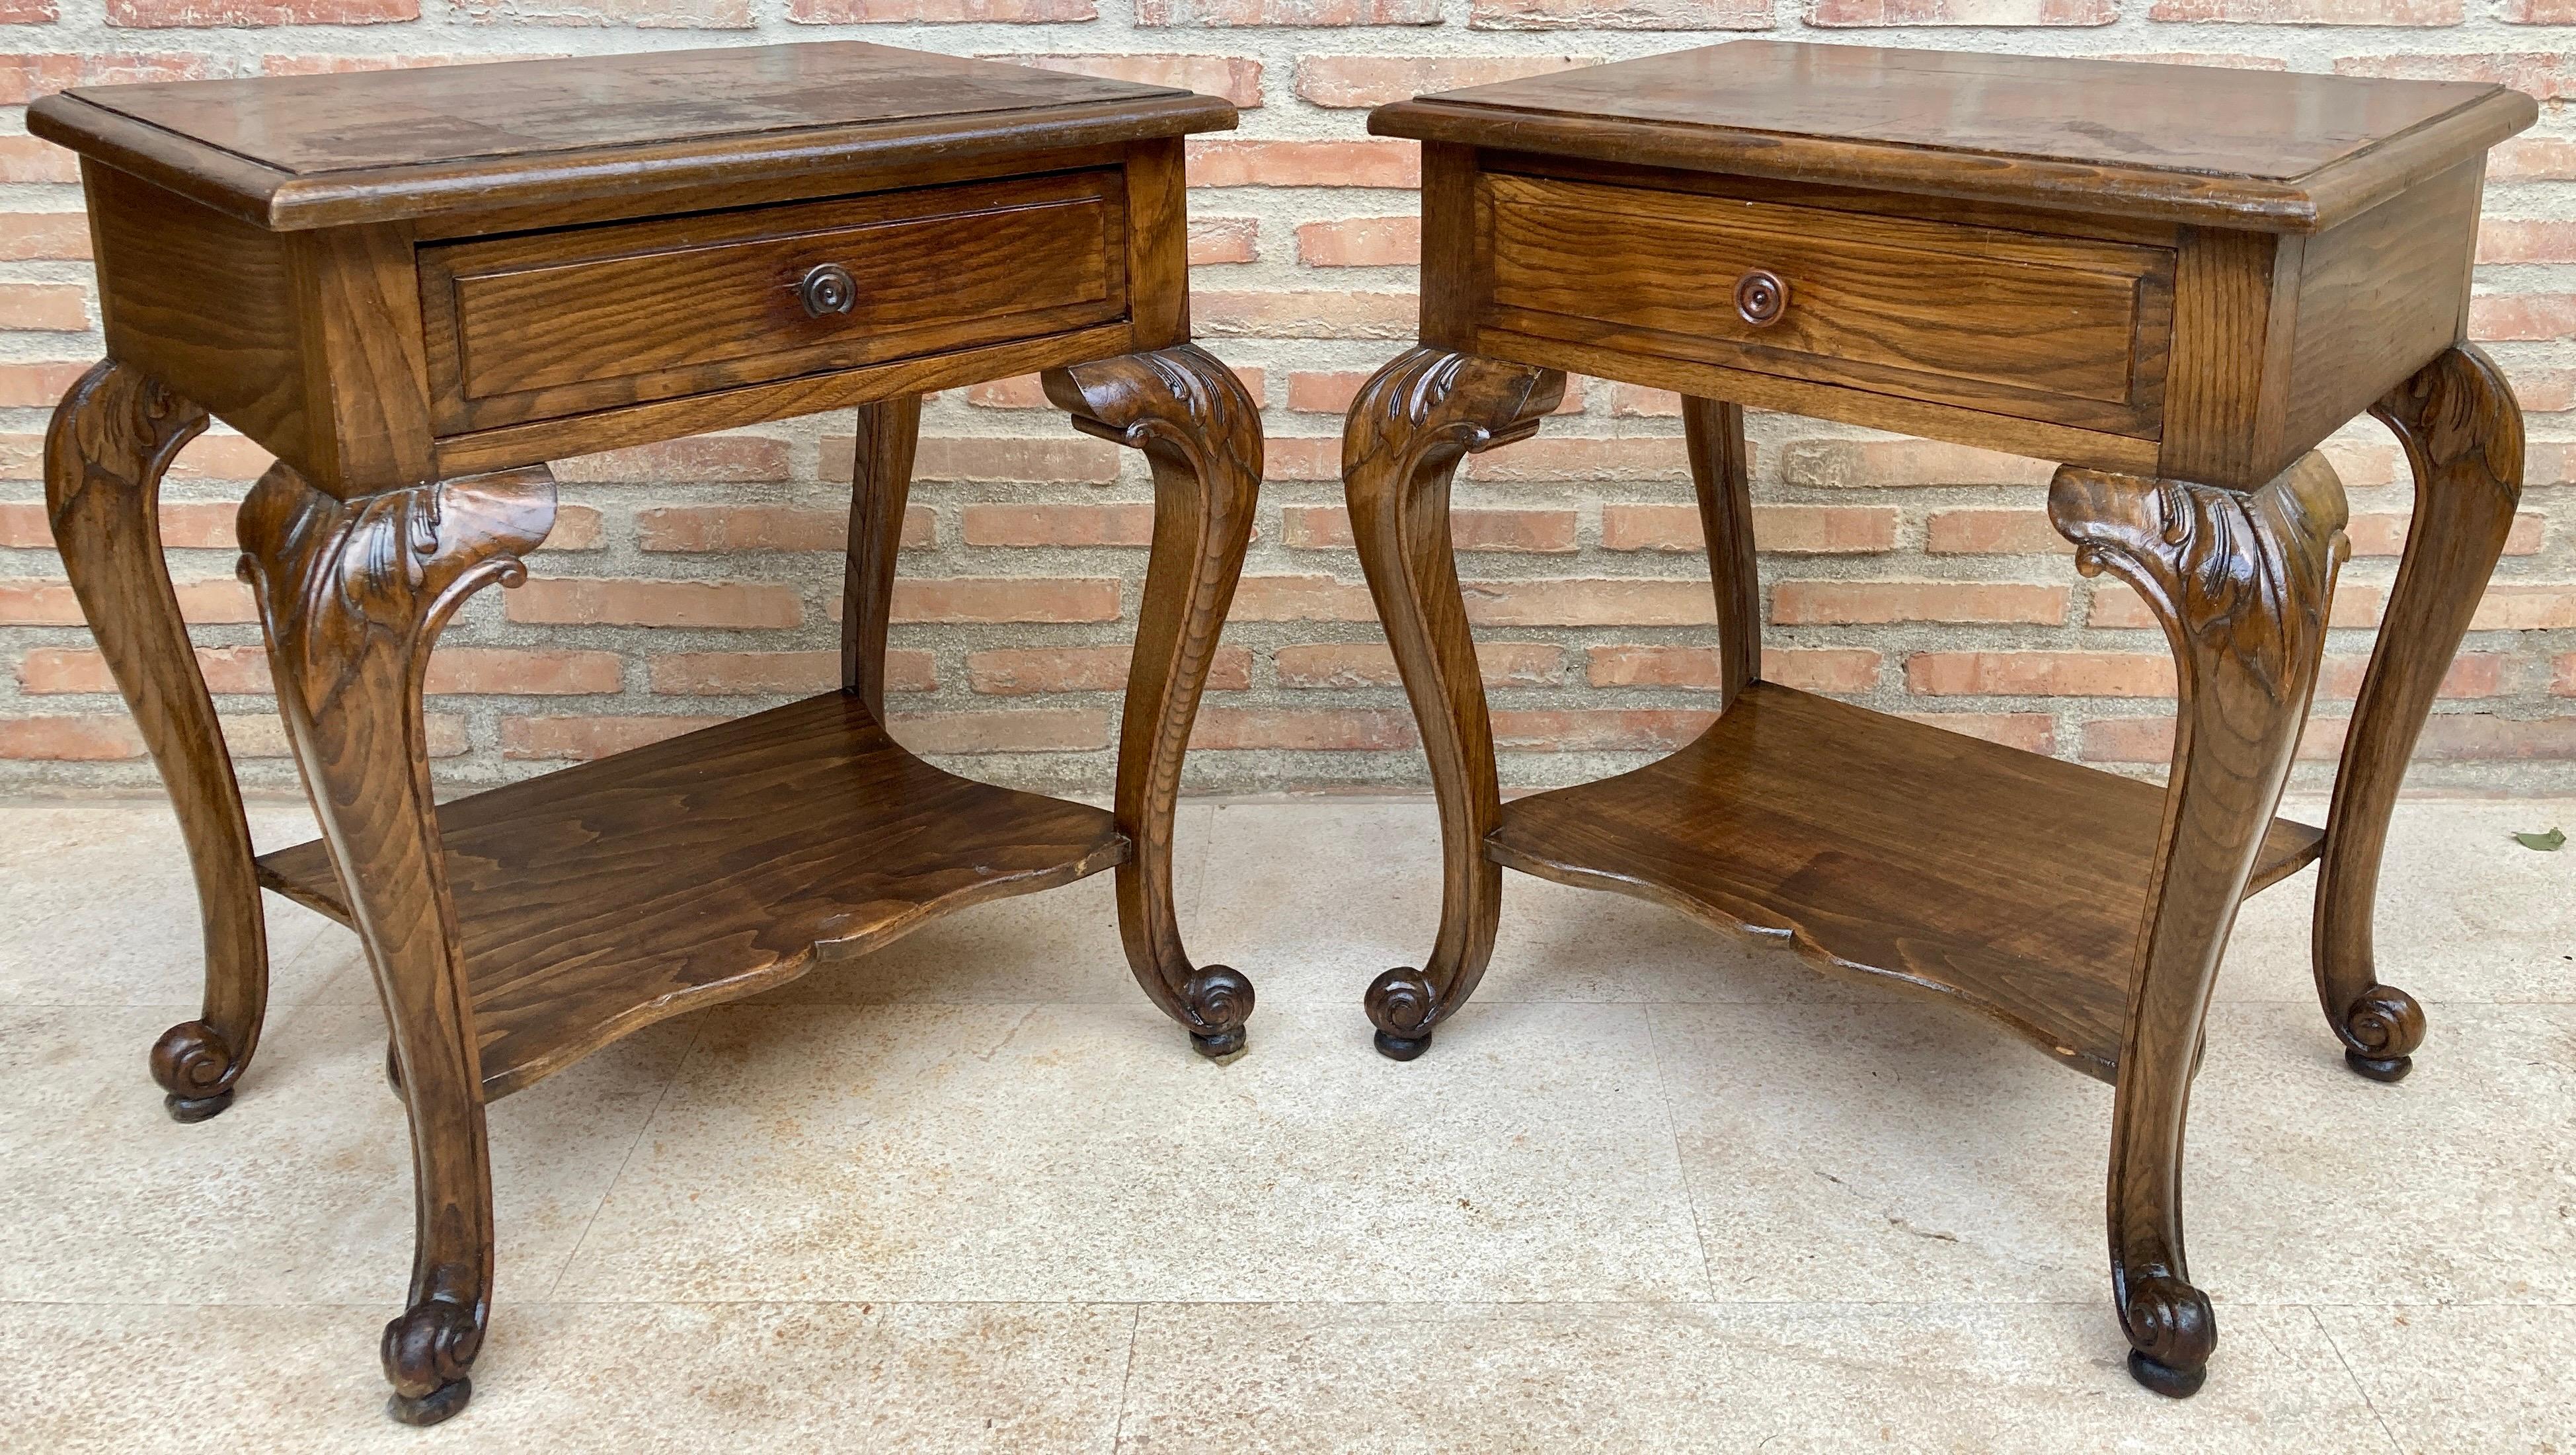 Early 20th century walnut nightstands with one drawer, set of two. 
Pair of early 20th century Louis XV style French walnut bedside tables. This pair of French 'tables de chevet' was created in the early years of the 20th century, at a time when